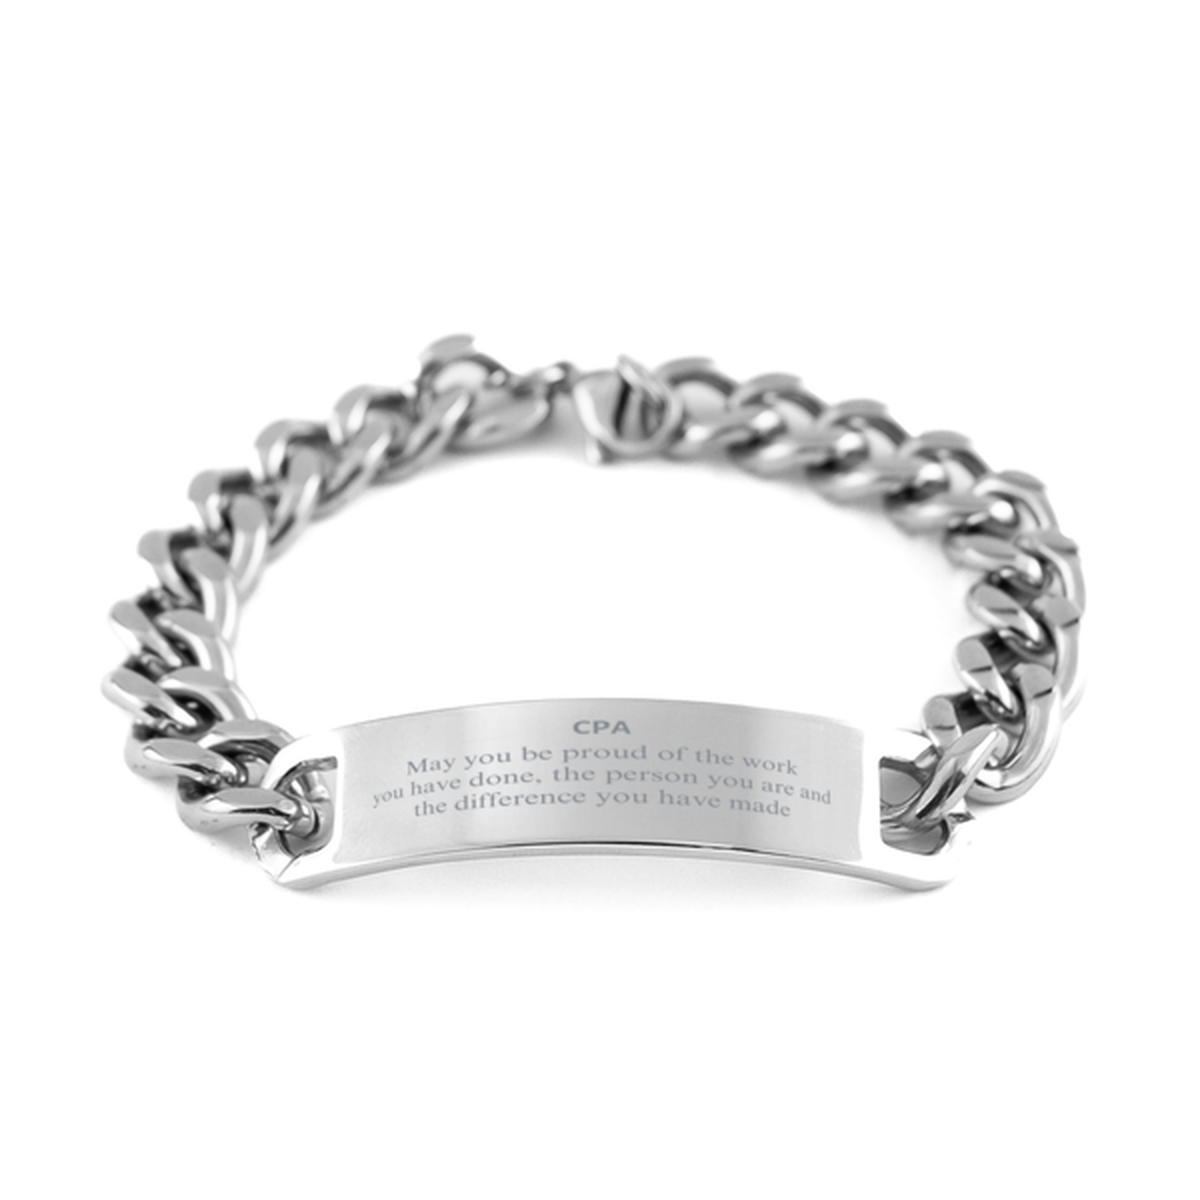 CPA May you be proud of the work you have done, Retirement CPA Cuban Chain Stainless Steel Bracelet for Colleague Appreciation Gifts Amazing for CPA